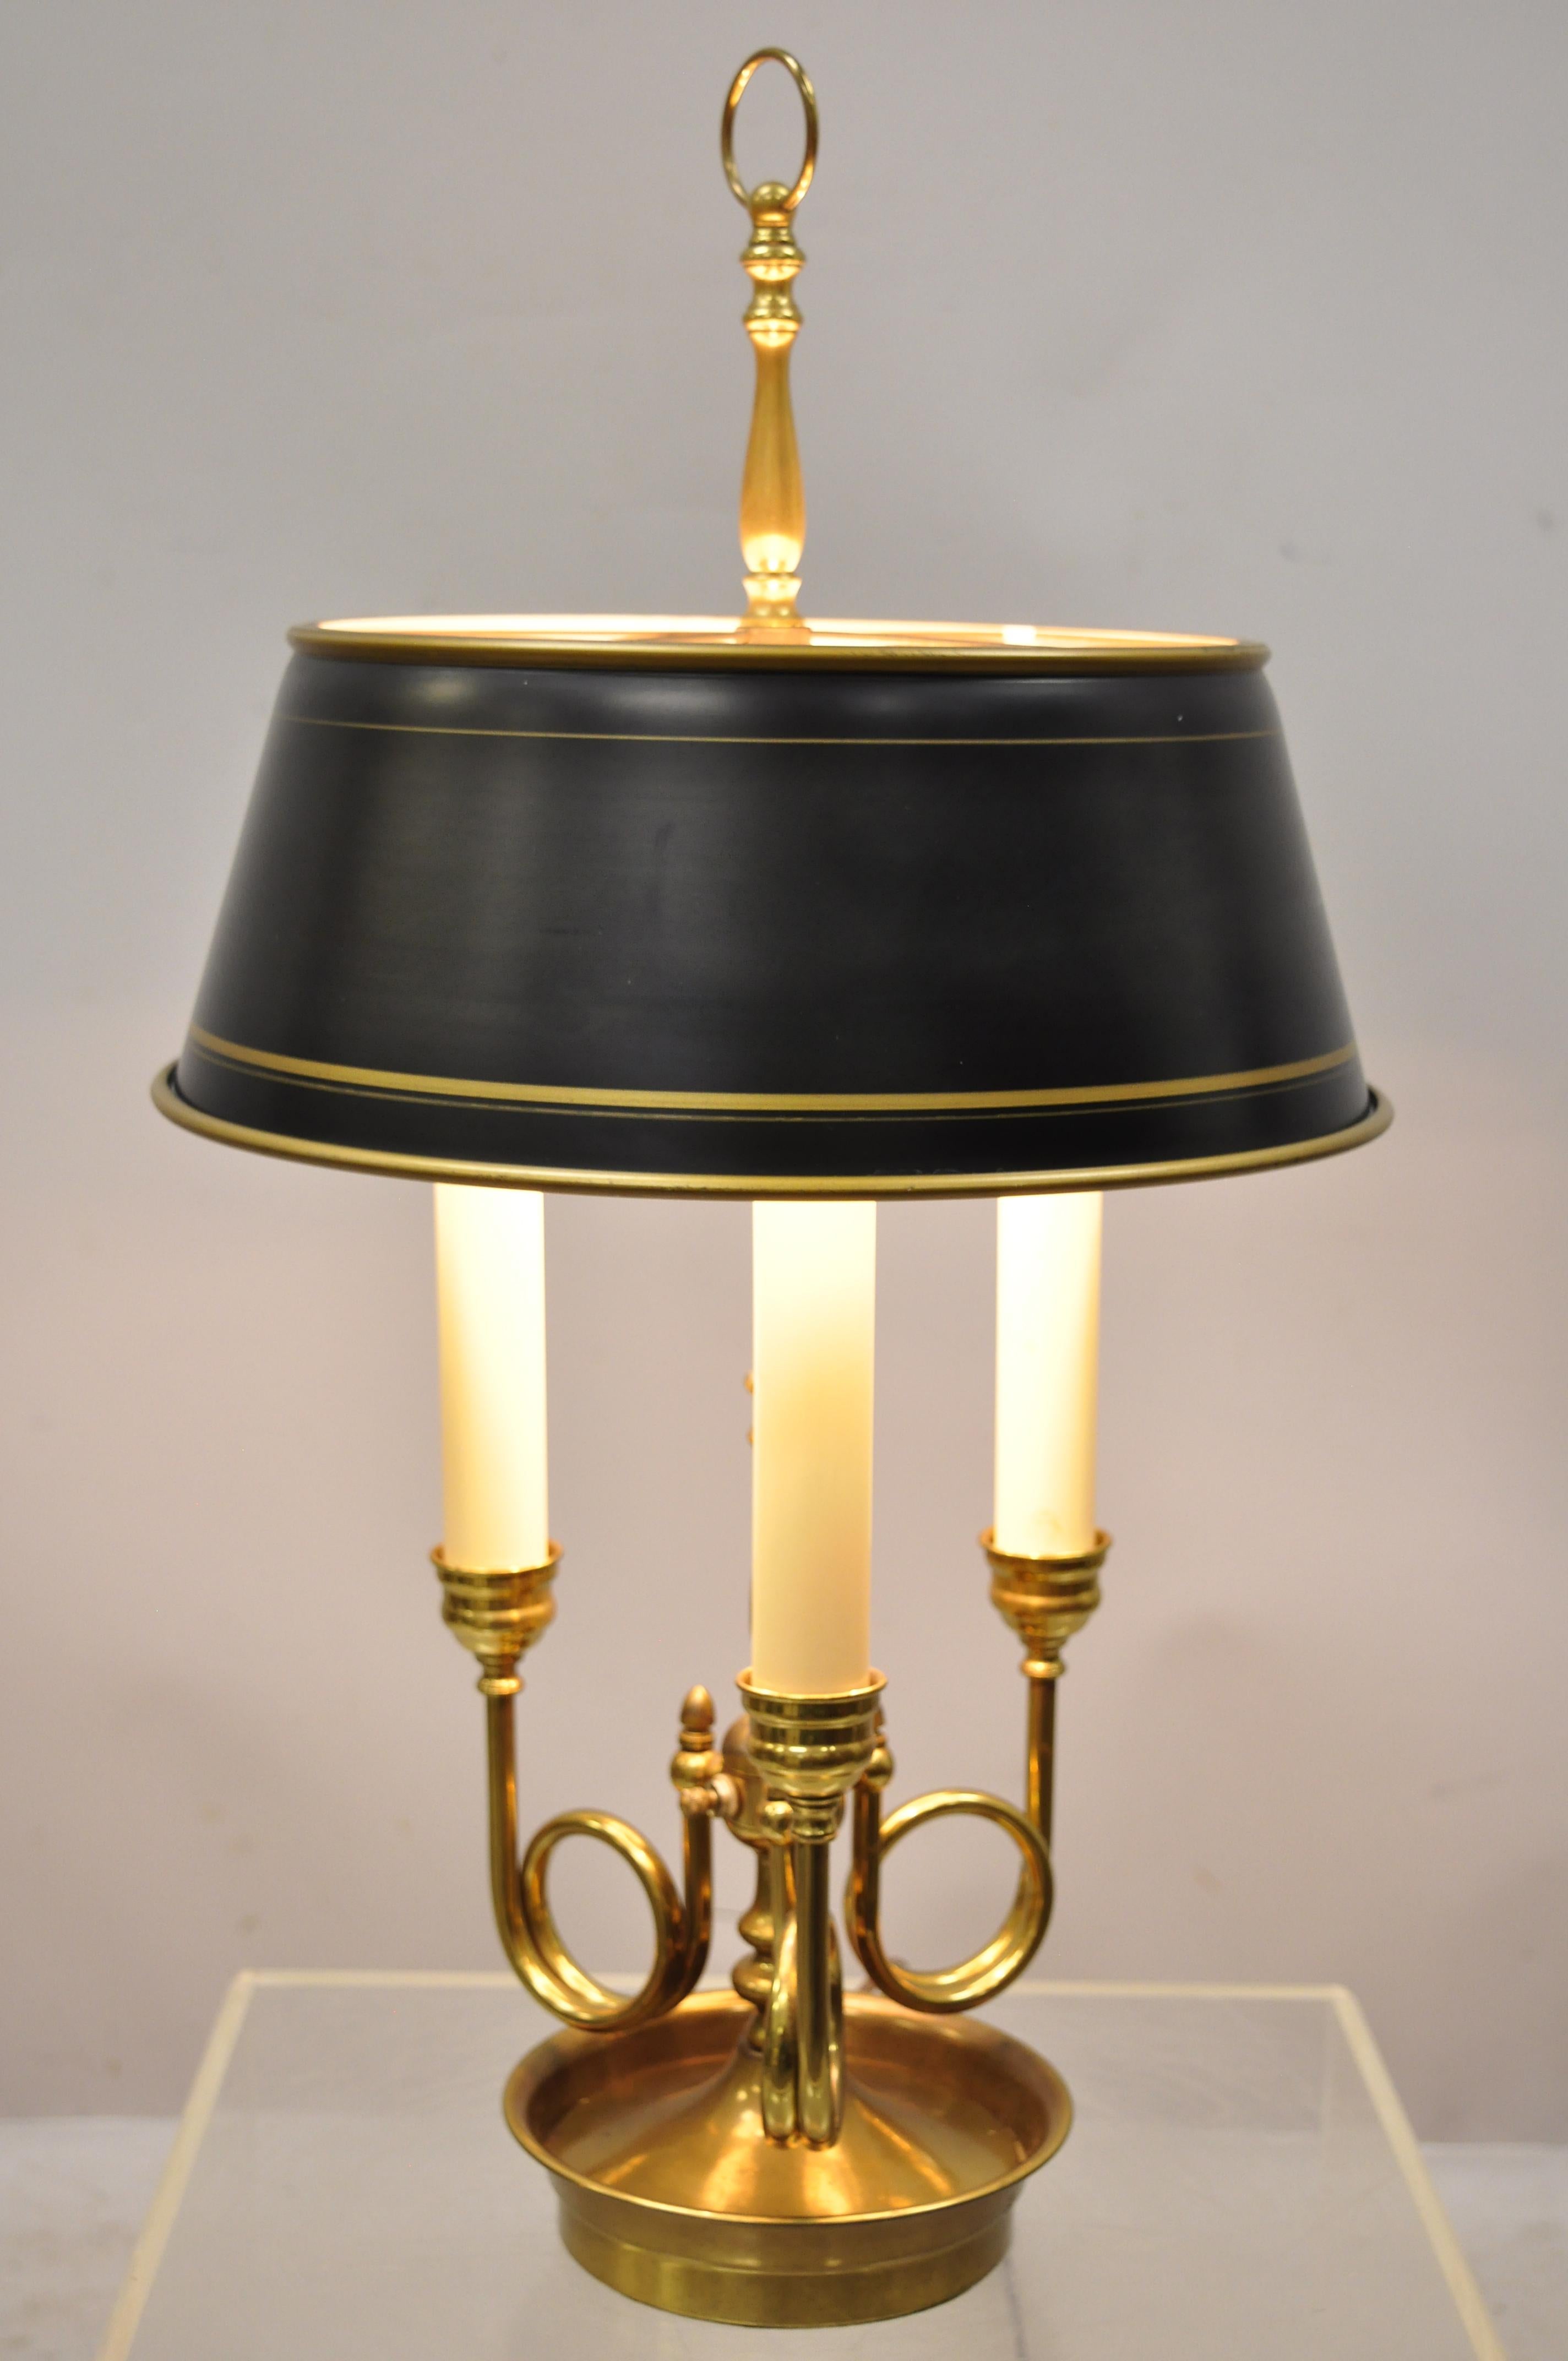 Vintage French Regency Empire style tole metal brass Bouillotte trumpet desk table lamp. Item features black tole metal shade, 3 